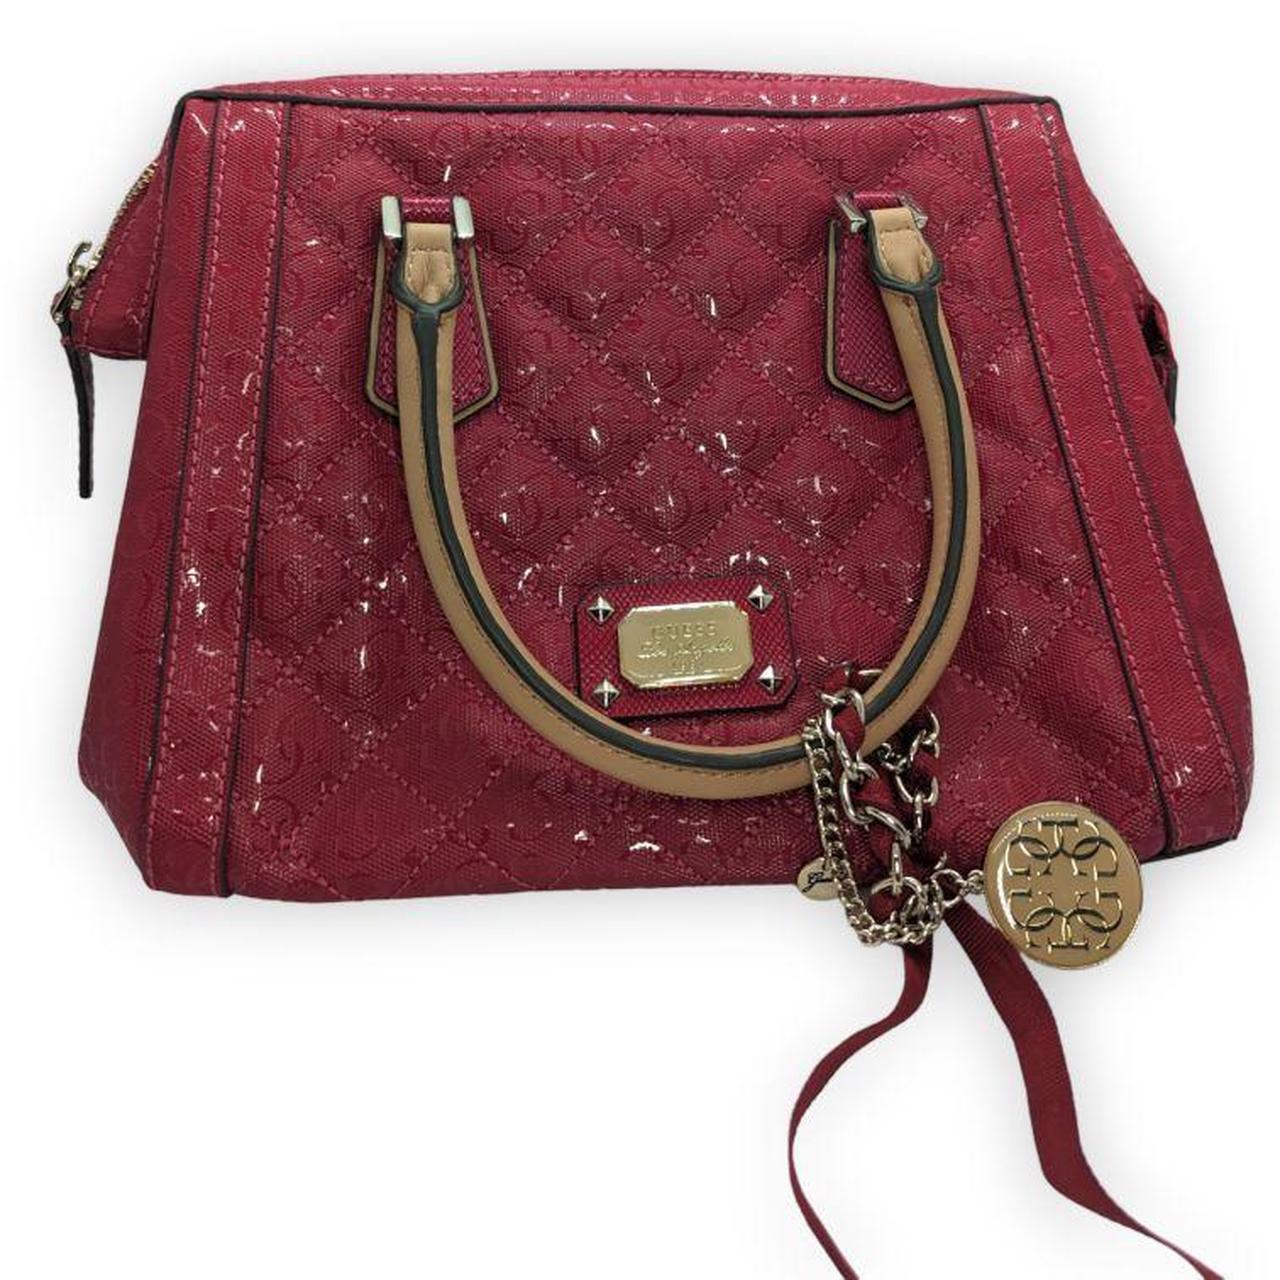 Guess Red Purse - Etsy